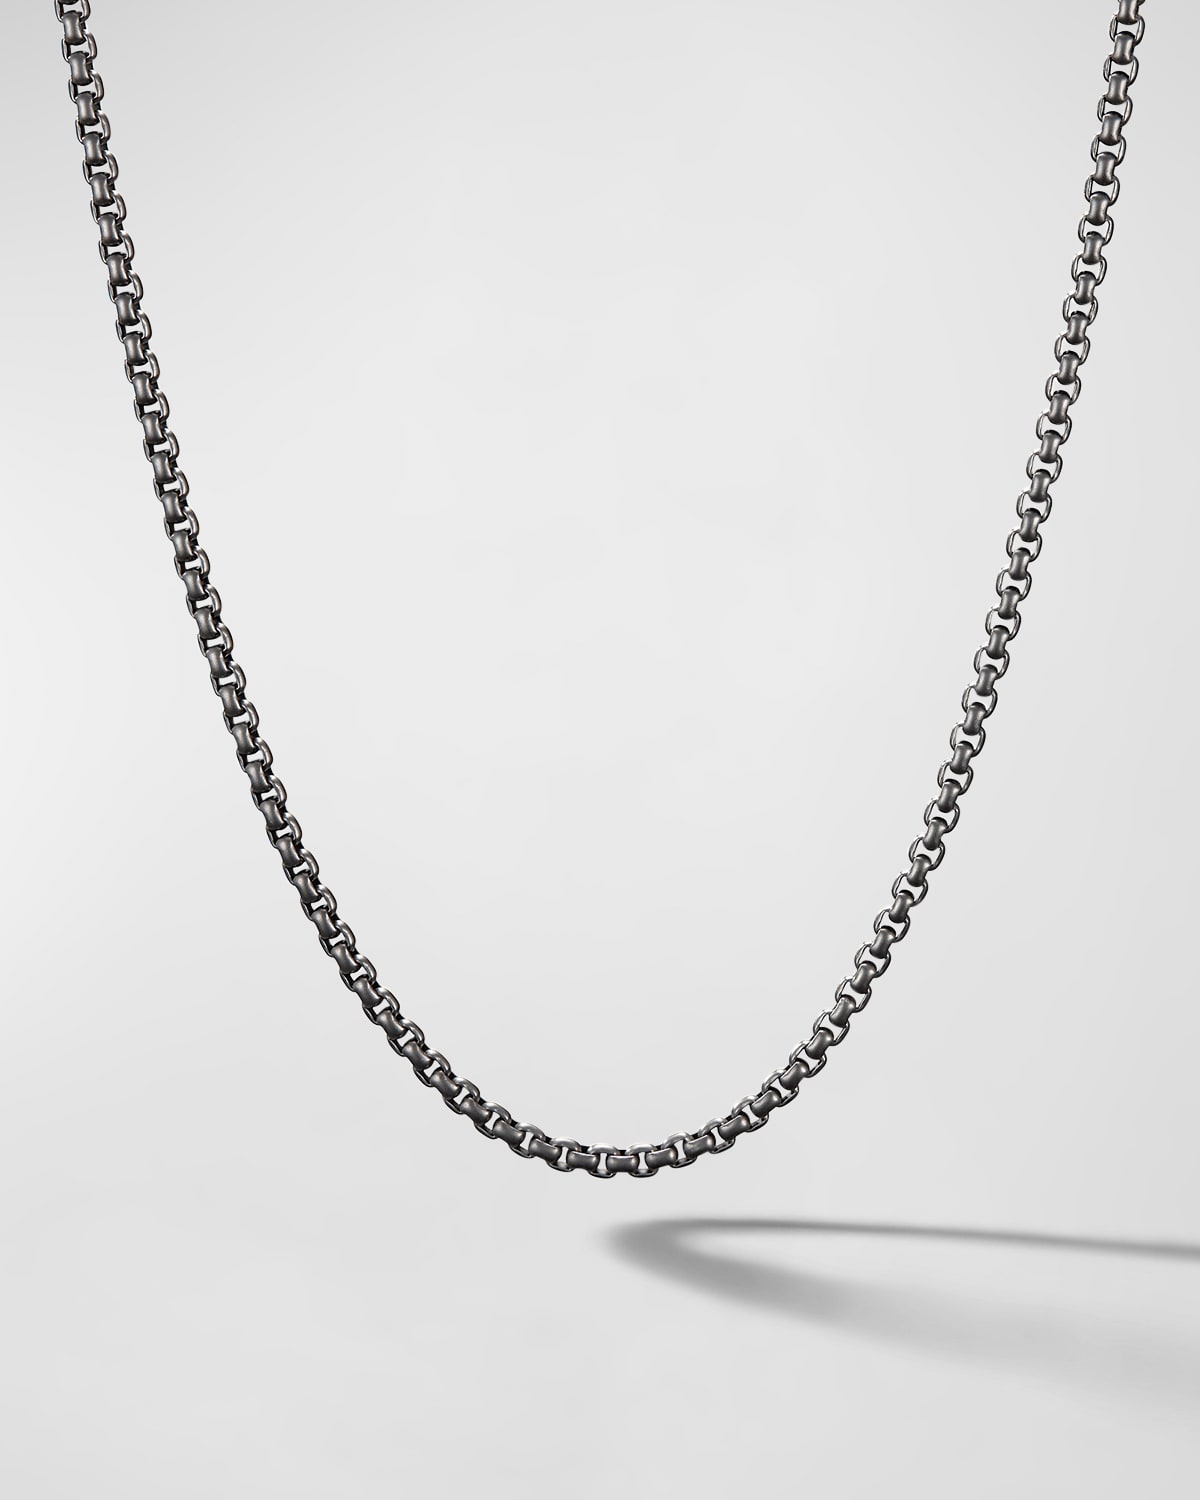 Men's Box Chain Necklace in Darkened Stainless Steel, 2.7mm, 24"L